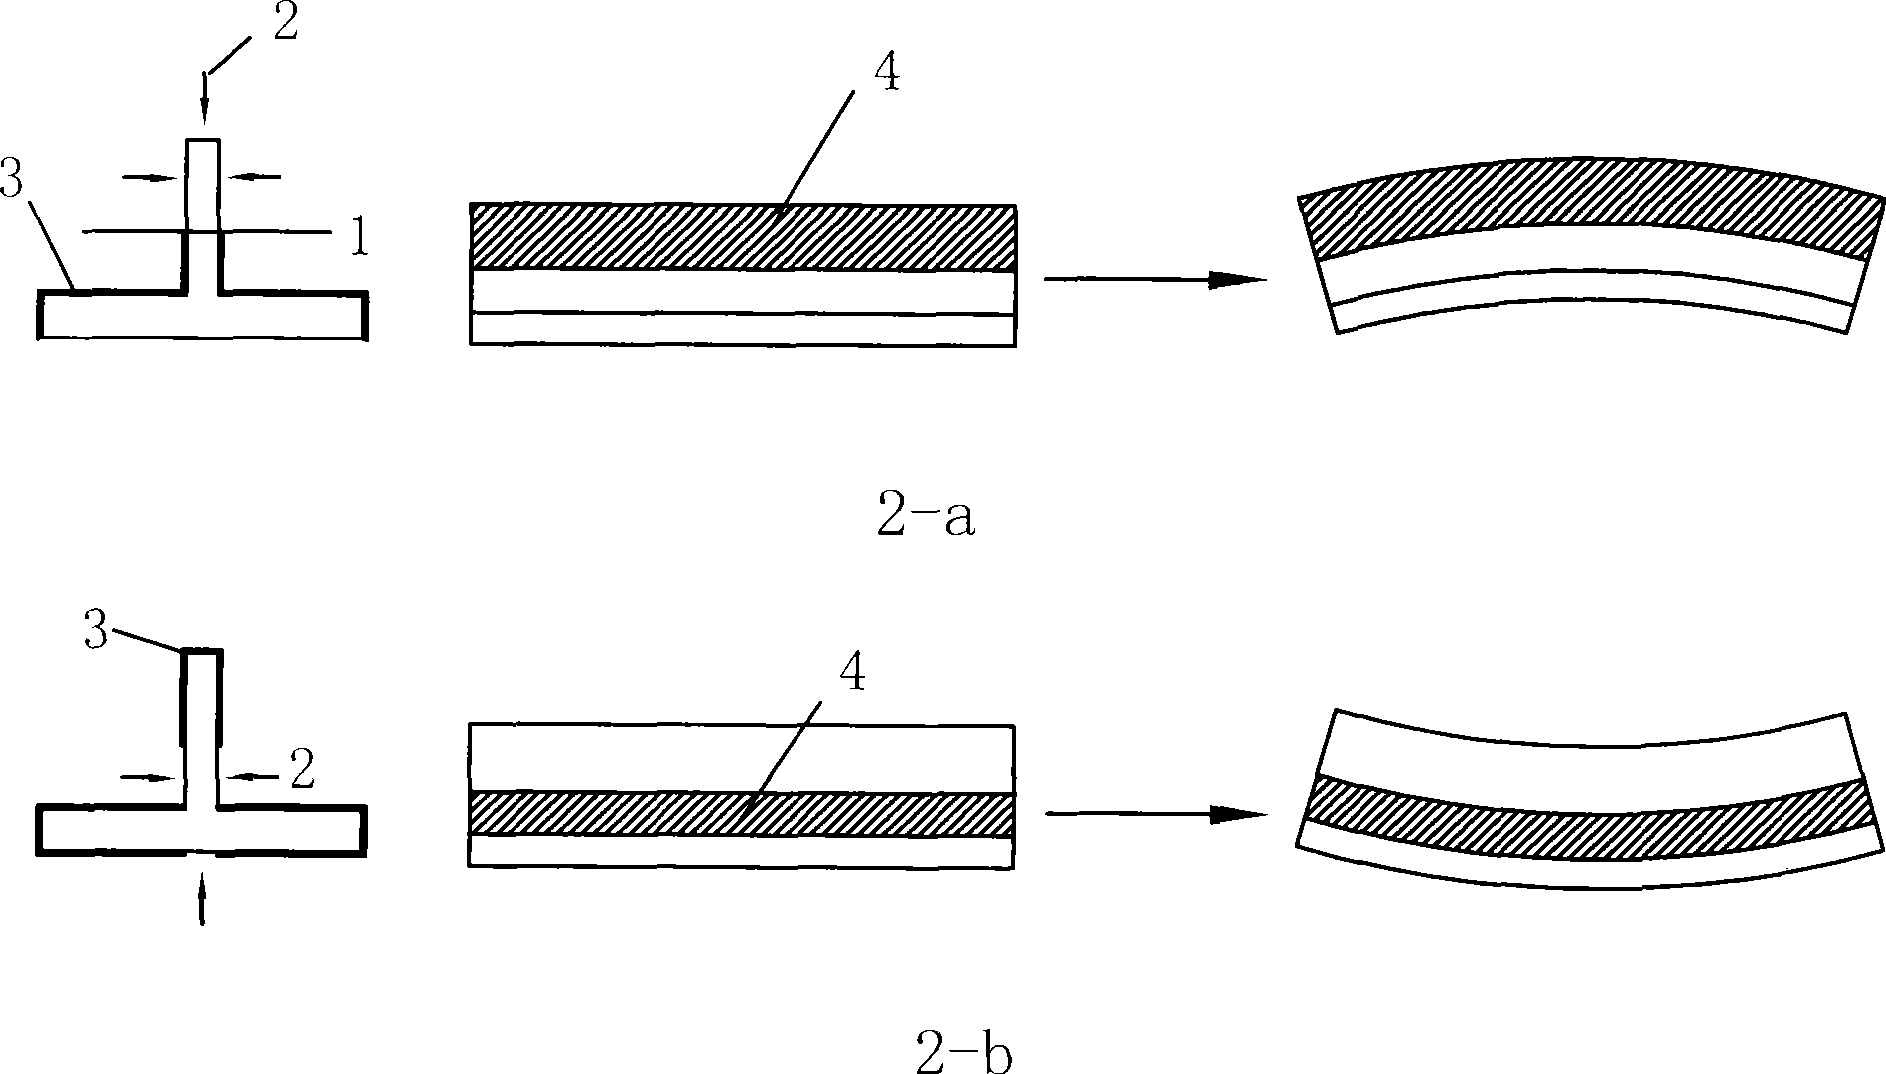 A peen forming method for a ribbed structure